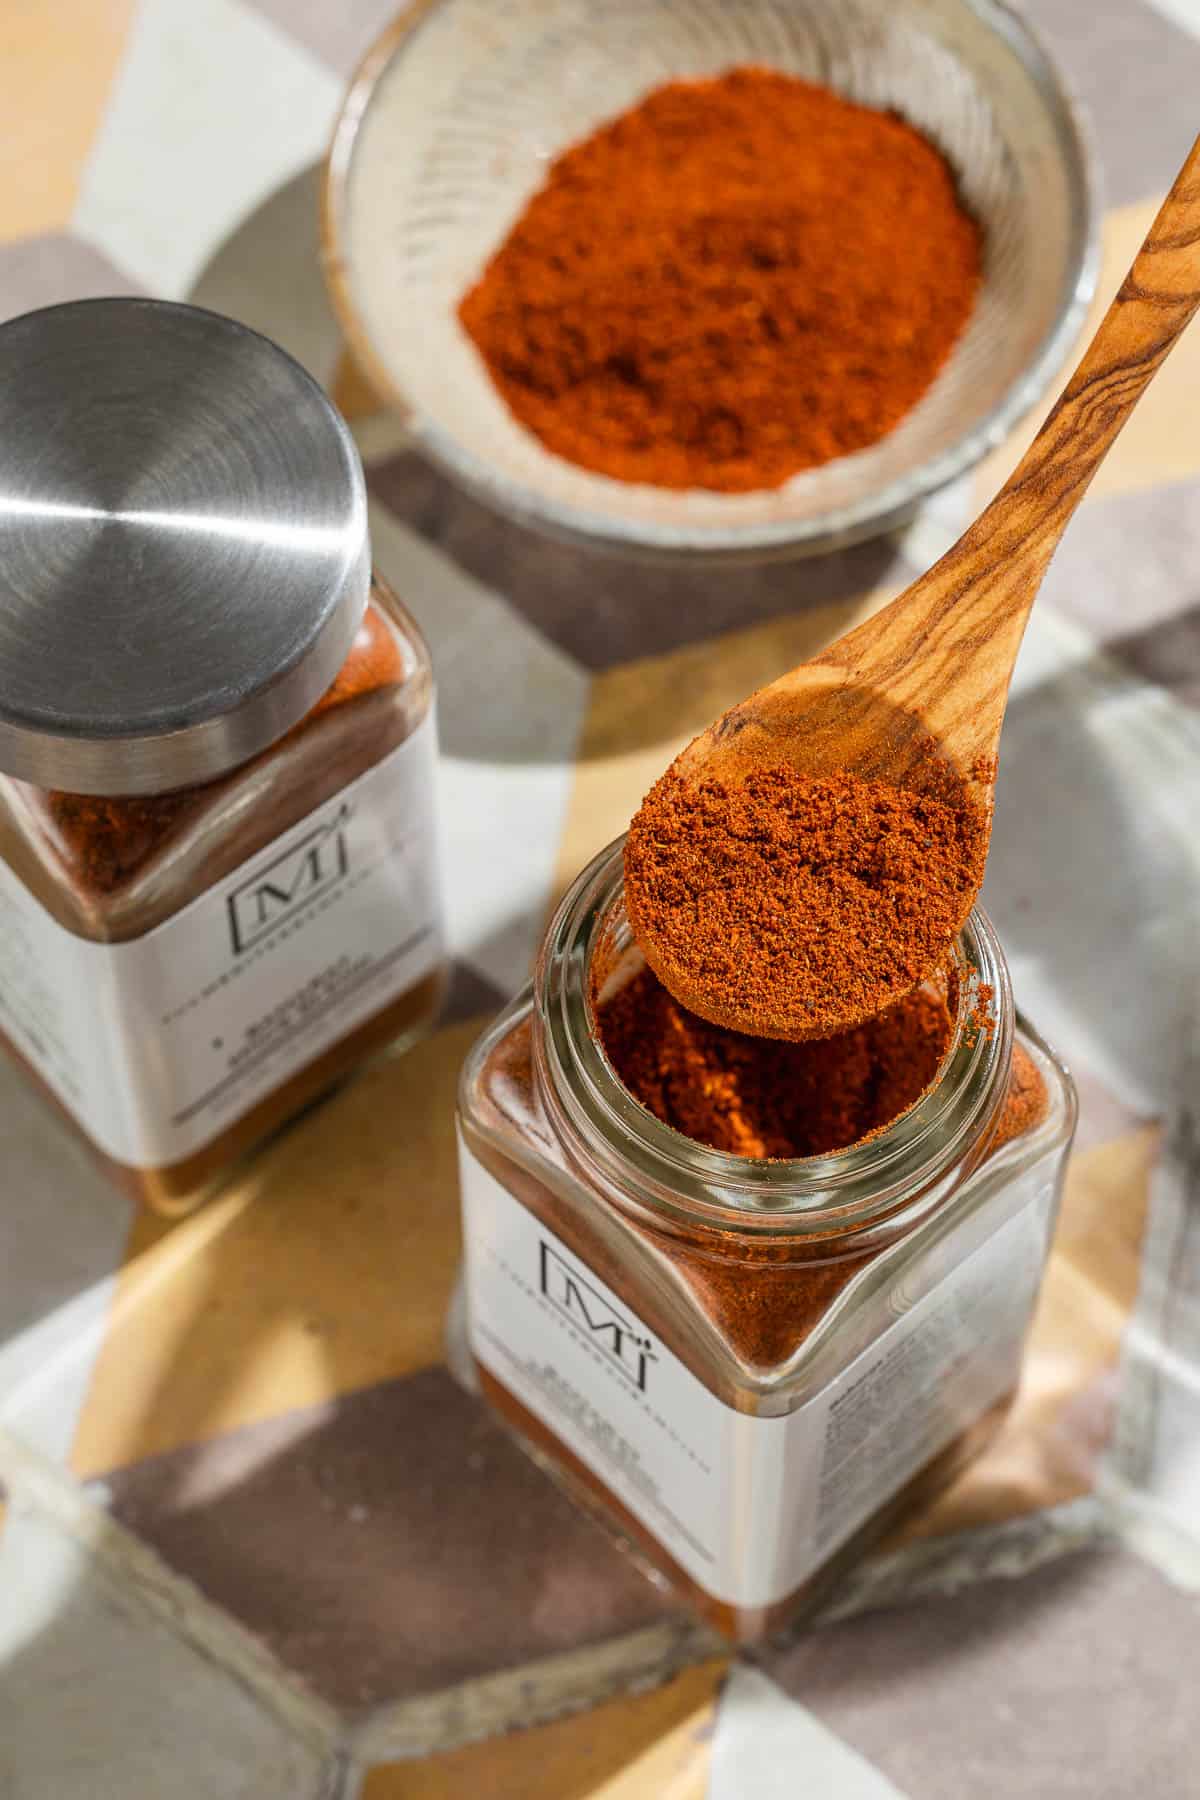 Baharat spice blend on a small wooden spoon being held over an open jar of the spice. Next to this is another jar and a small bowl of the spice.